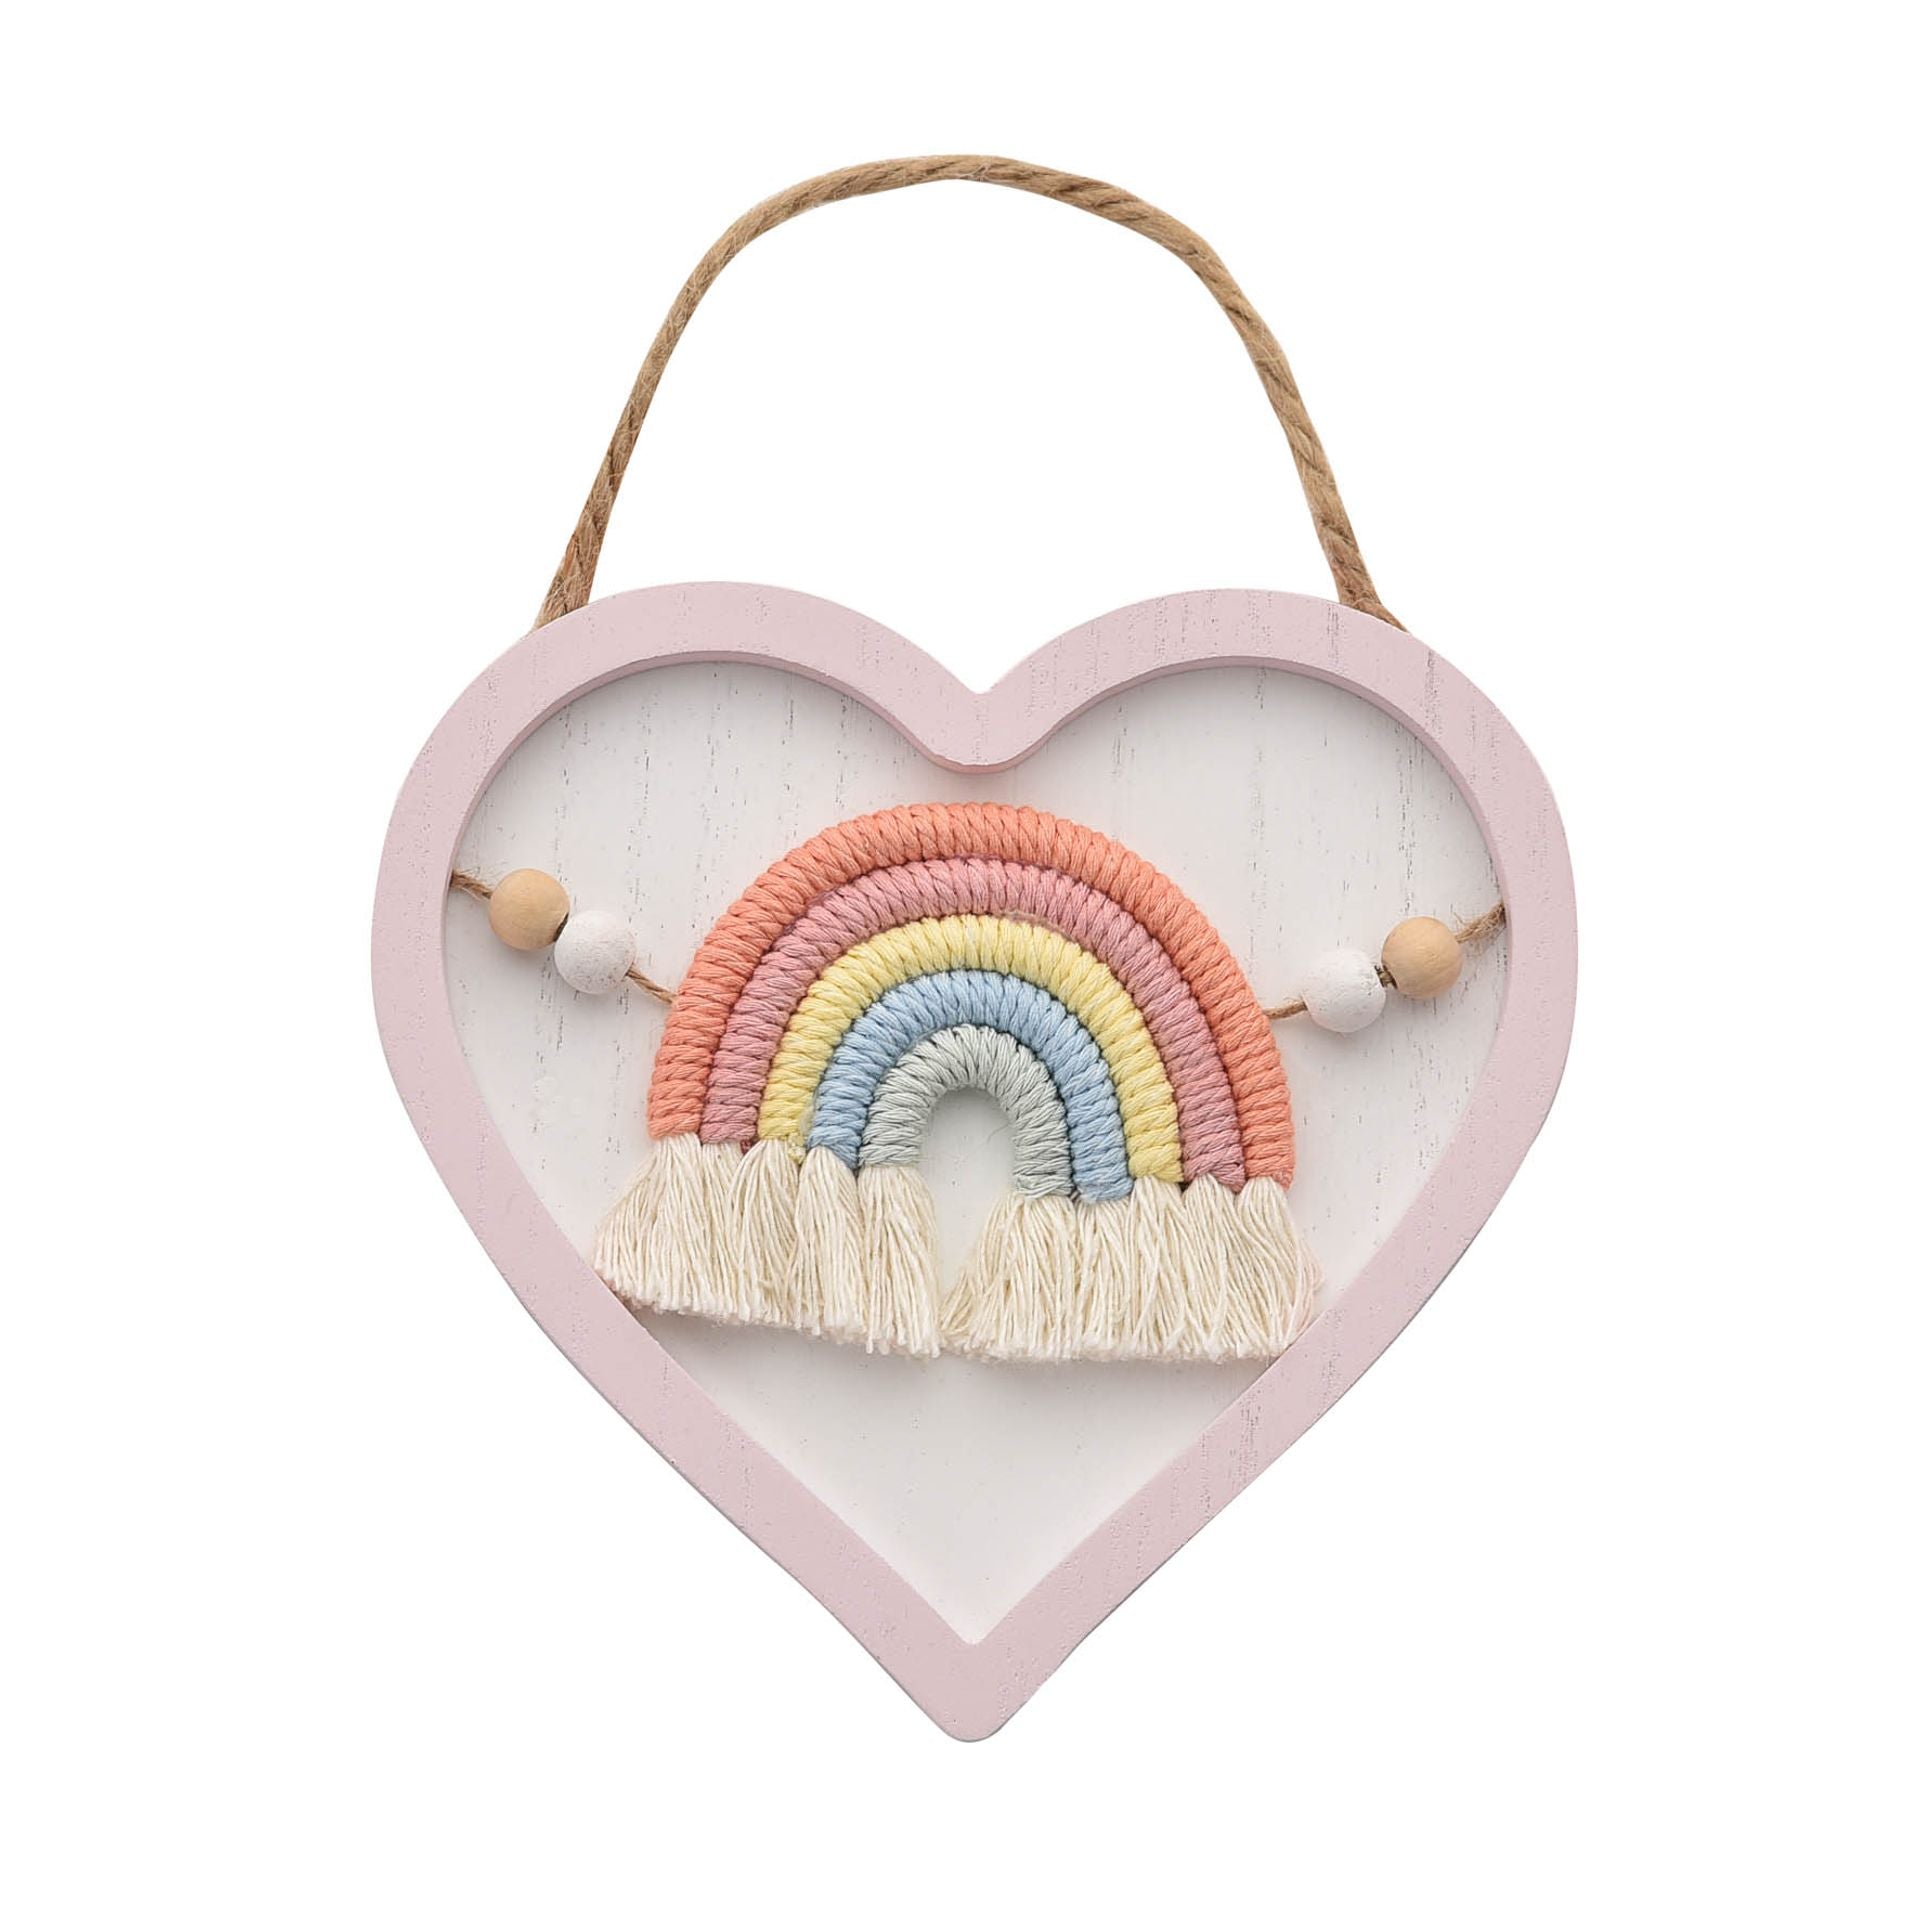 A hanging plaque in the shape of a heart with a pink outer, a white insert and a macrame rainbow in the middle